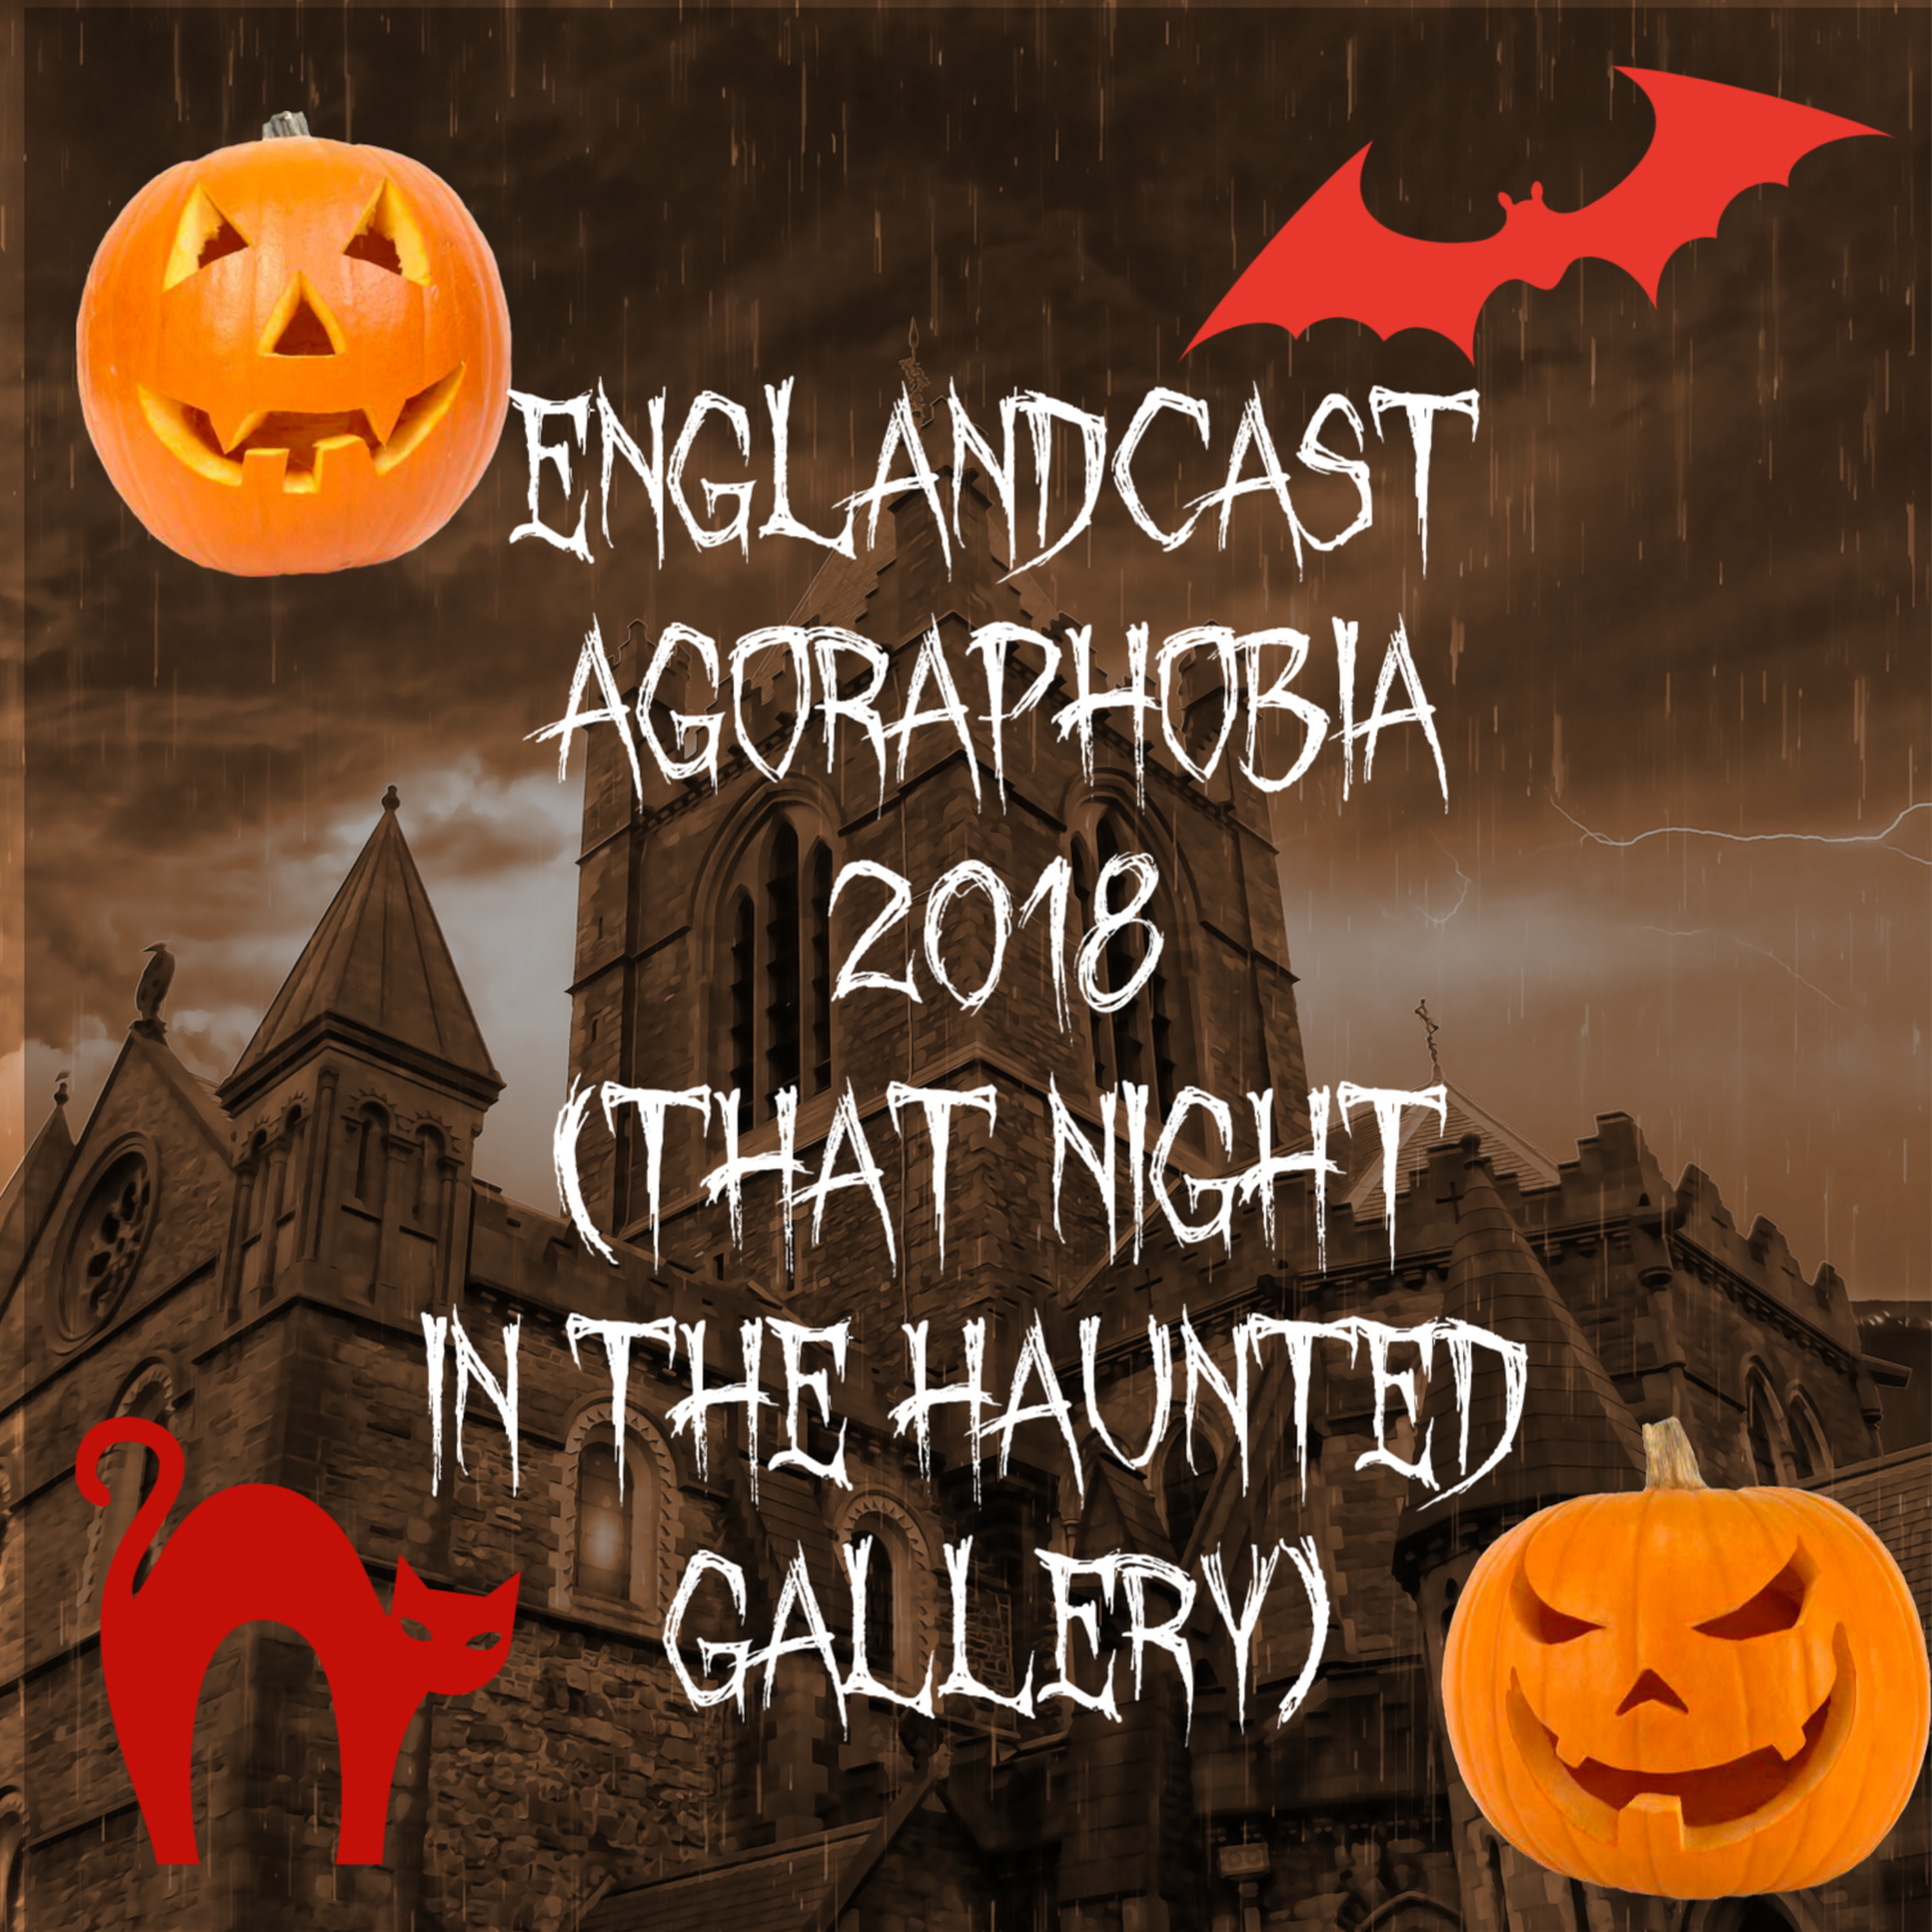 Supplemental: Agoraphobia 2018 - the Haunted Gallery 